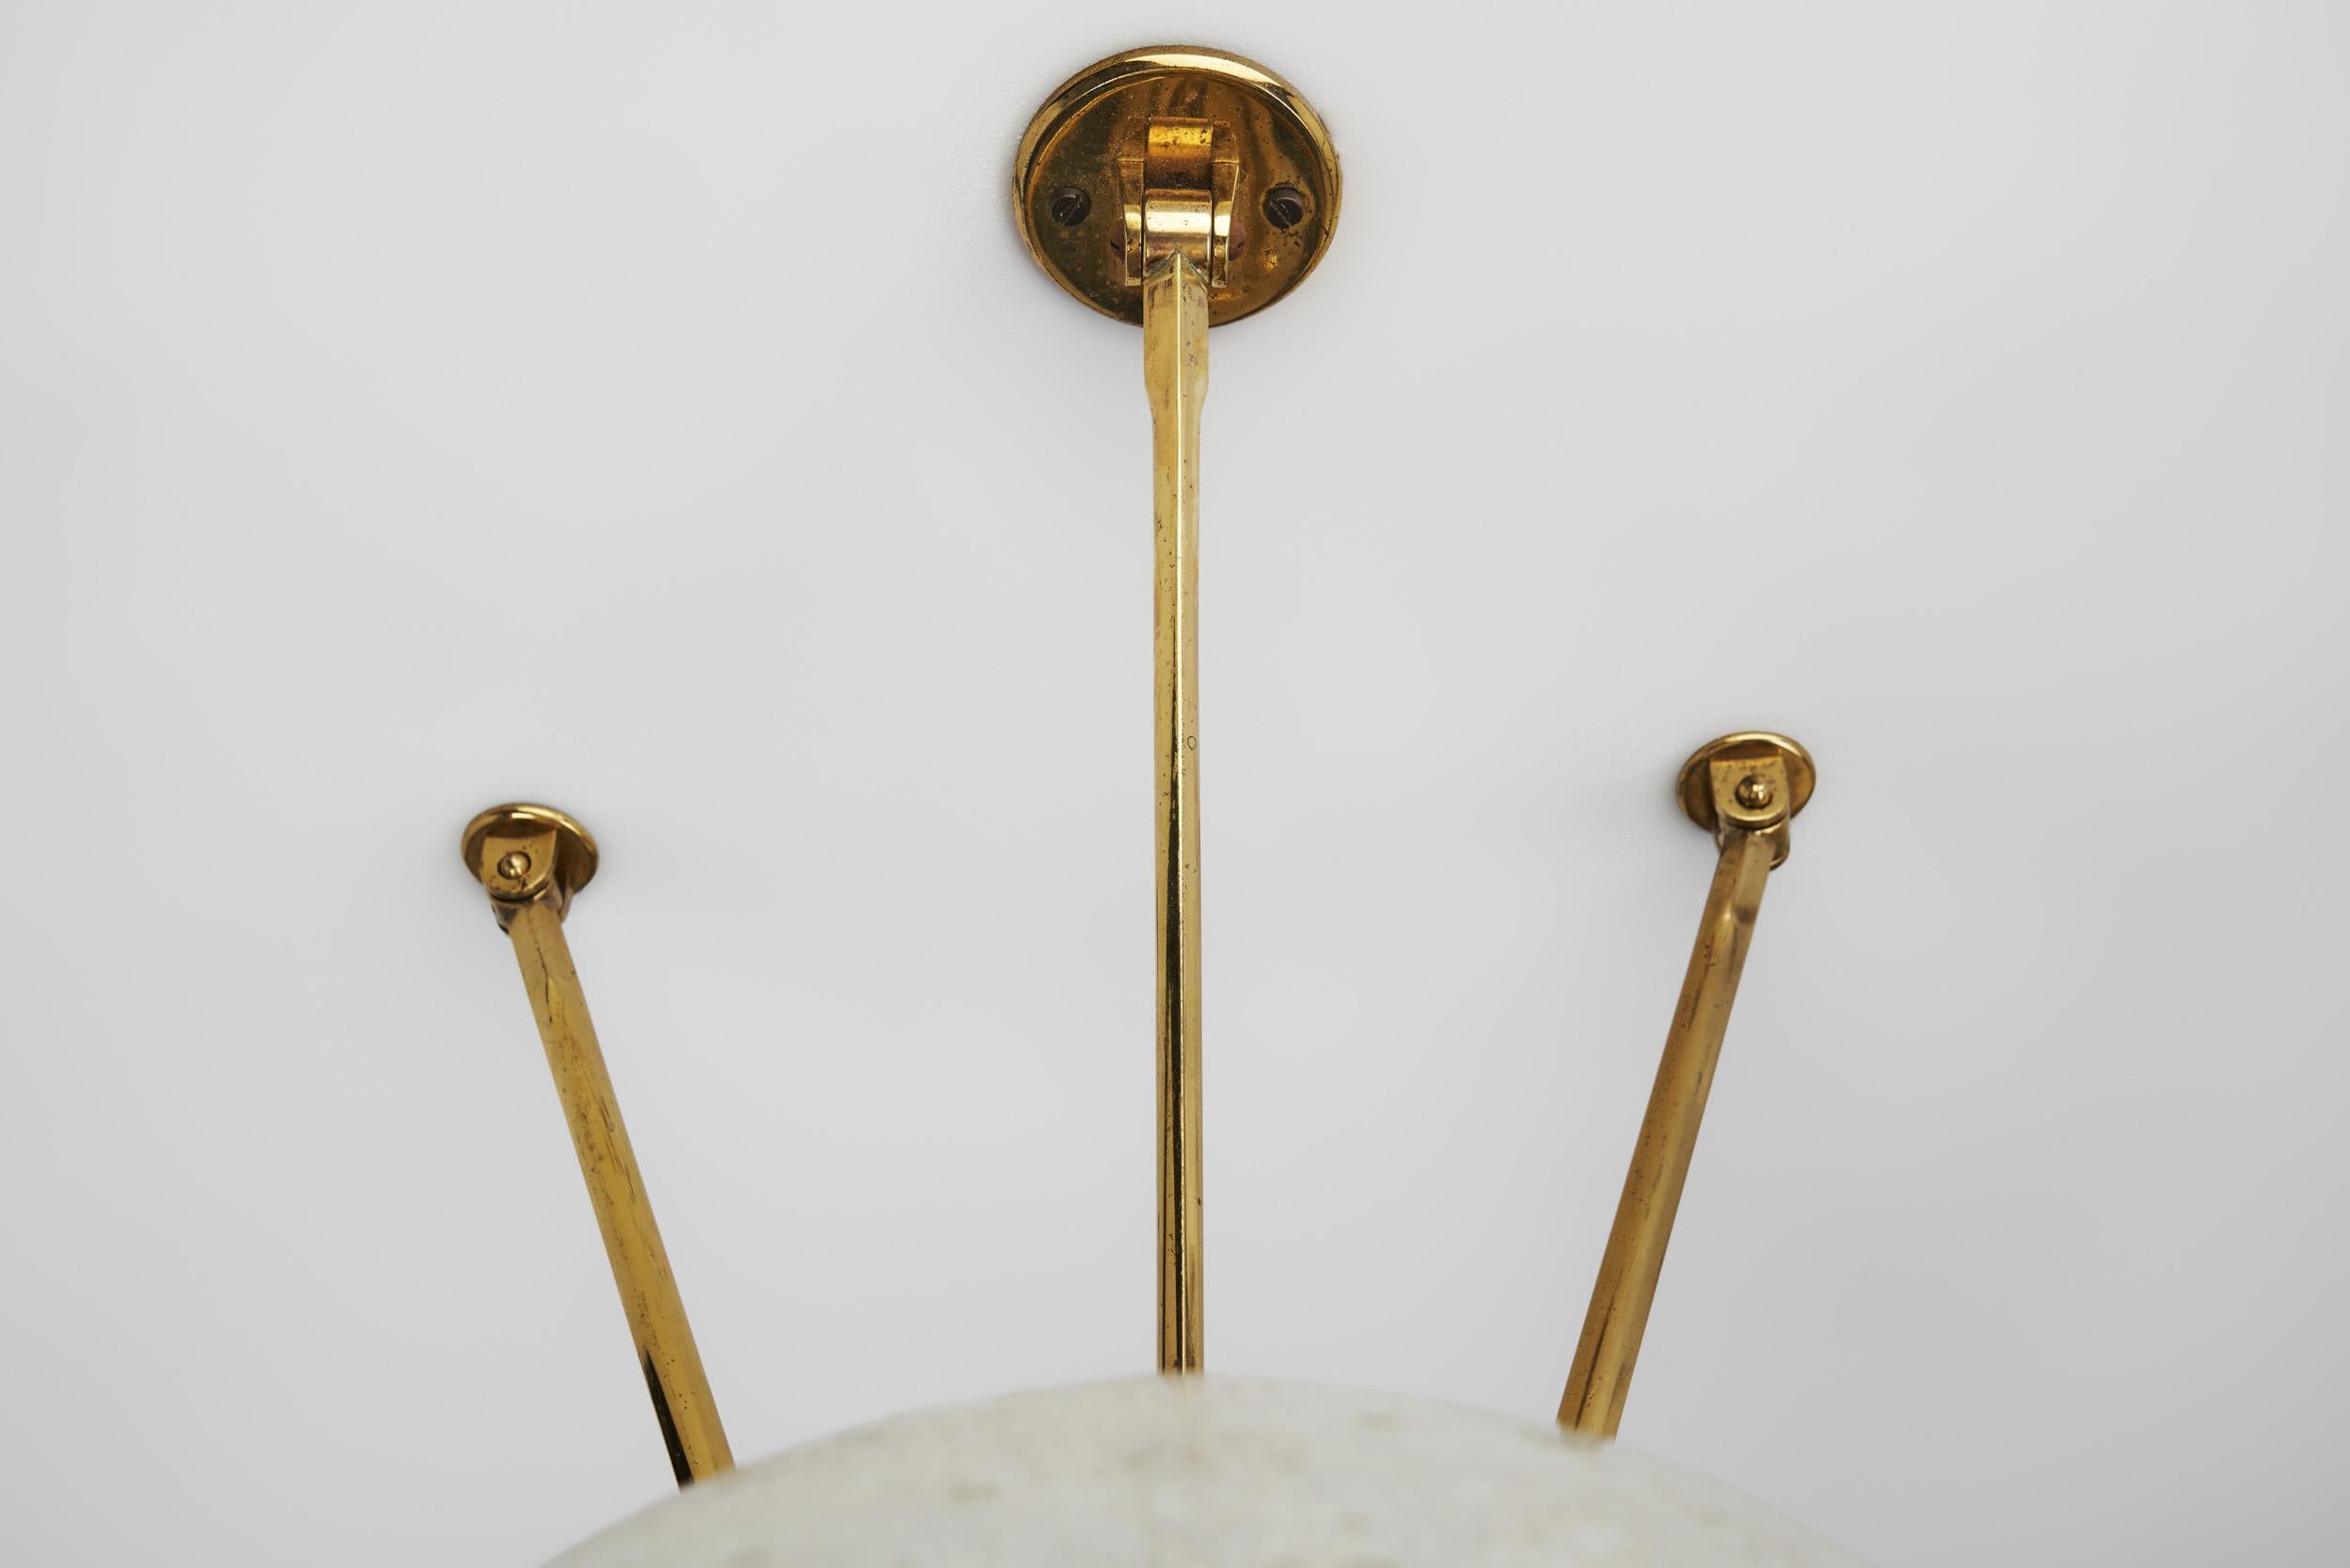 Large European Modern Wall Sconce in Brass & Bubble Glass, Europe circa 1950s For Sale 9